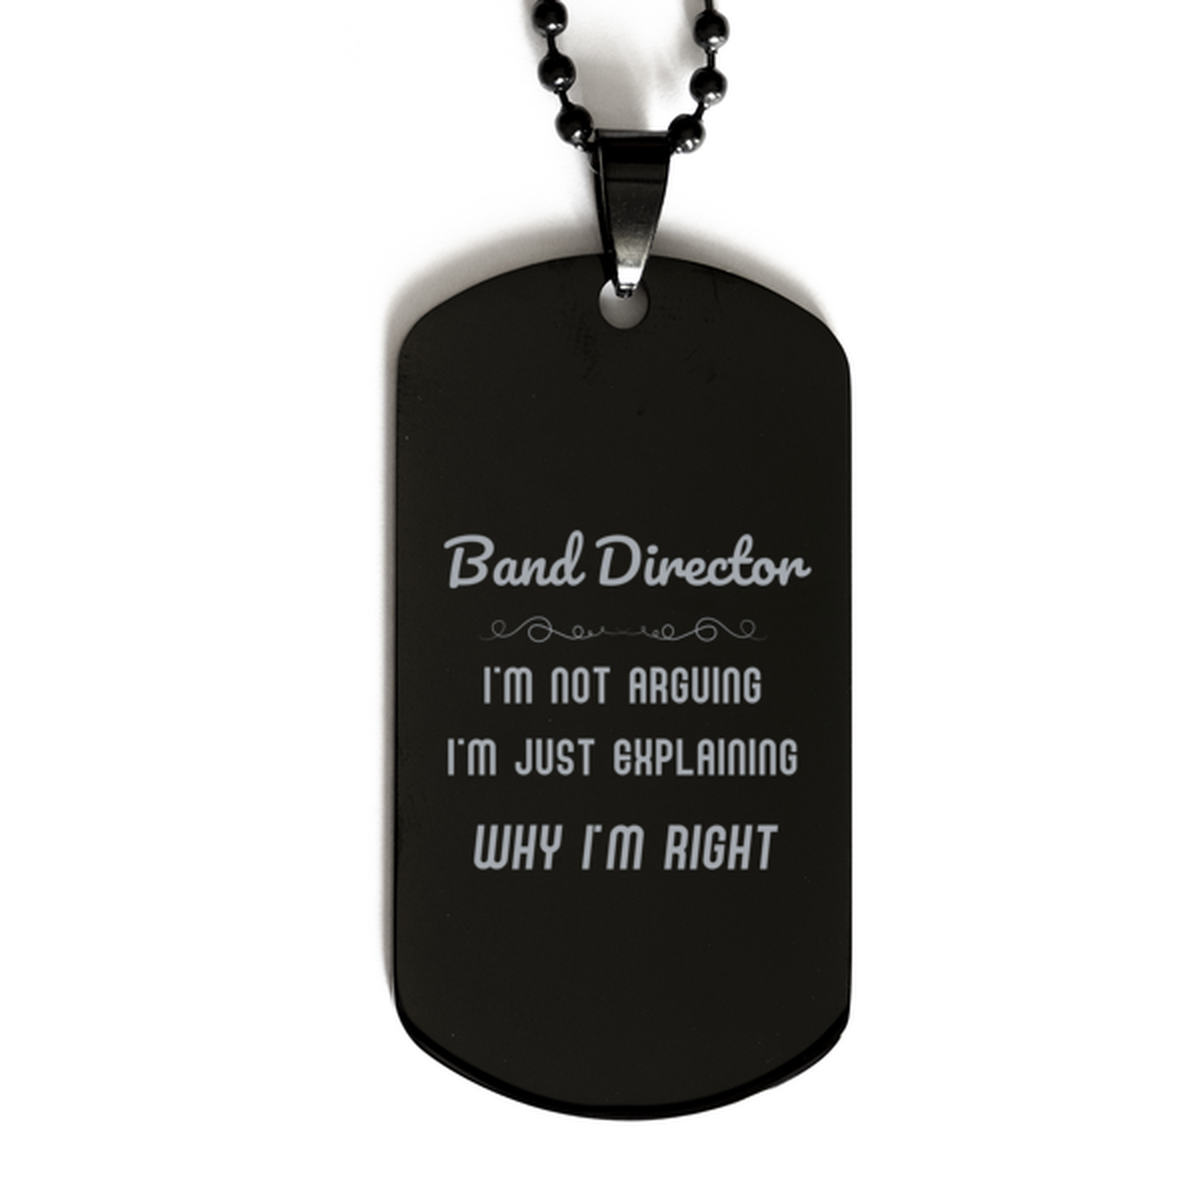 Band Director I'm not Arguing. I'm Just Explaining Why I'm RIGHT Black Dog Tag, Funny Saying Quote Band Director Gifts For Band Director Graduation Birthday Christmas Gifts for Men Women Coworker